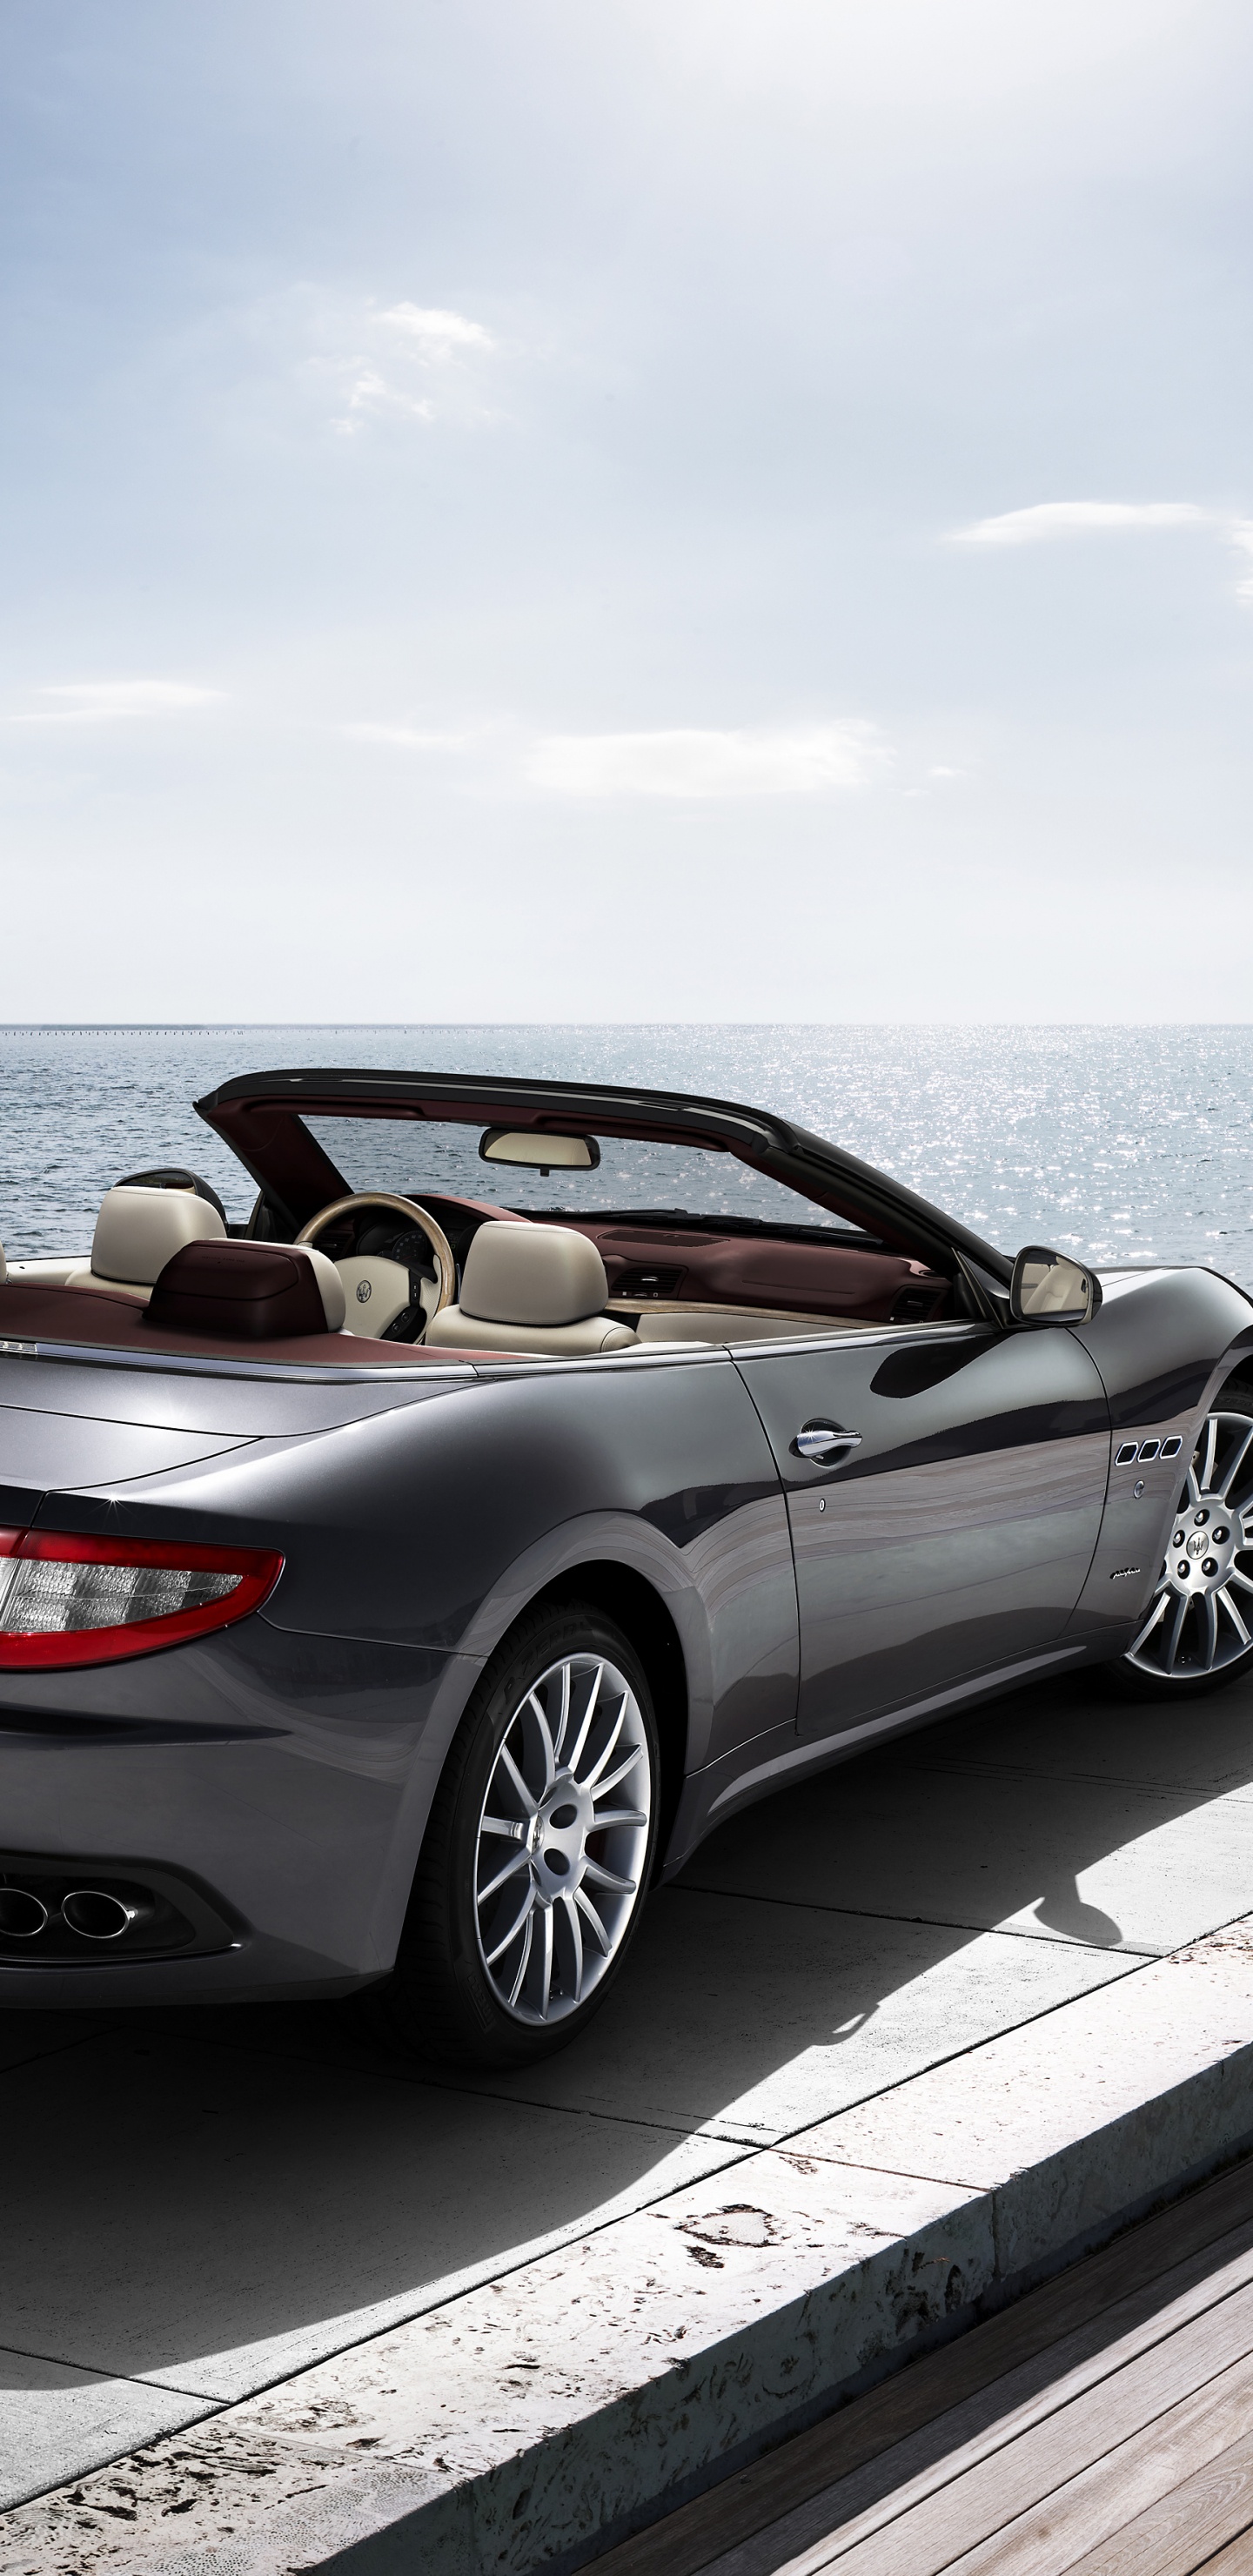 Silver Mercedes Benz Convertible Coupe Parked on Dock During Daytime. Wallpaper in 1440x2960 Resolution